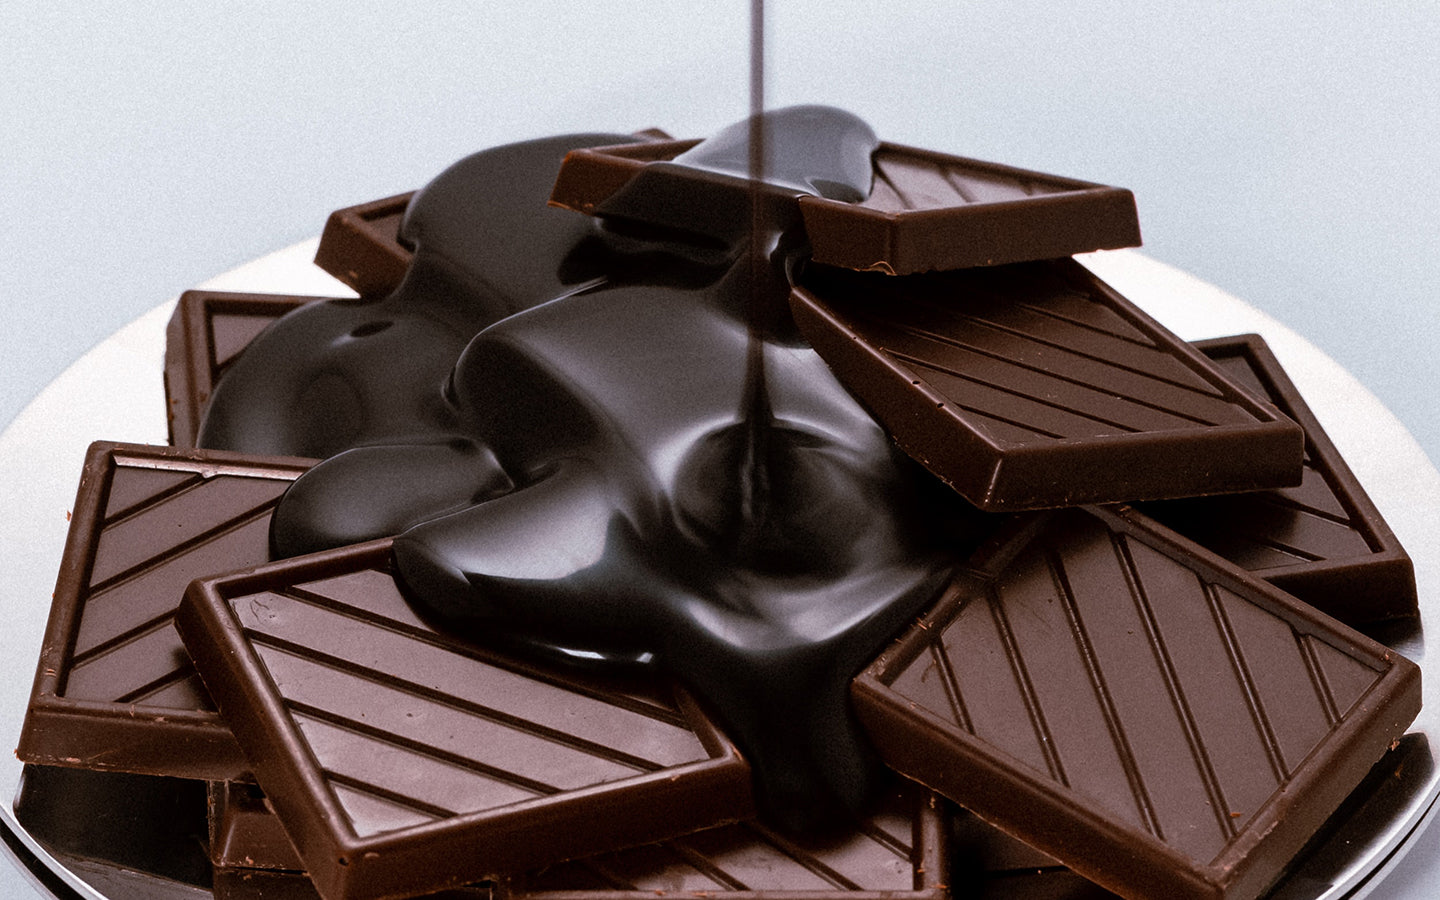 Ask the Expert: Why Does Chocolate Make You Thirsty?